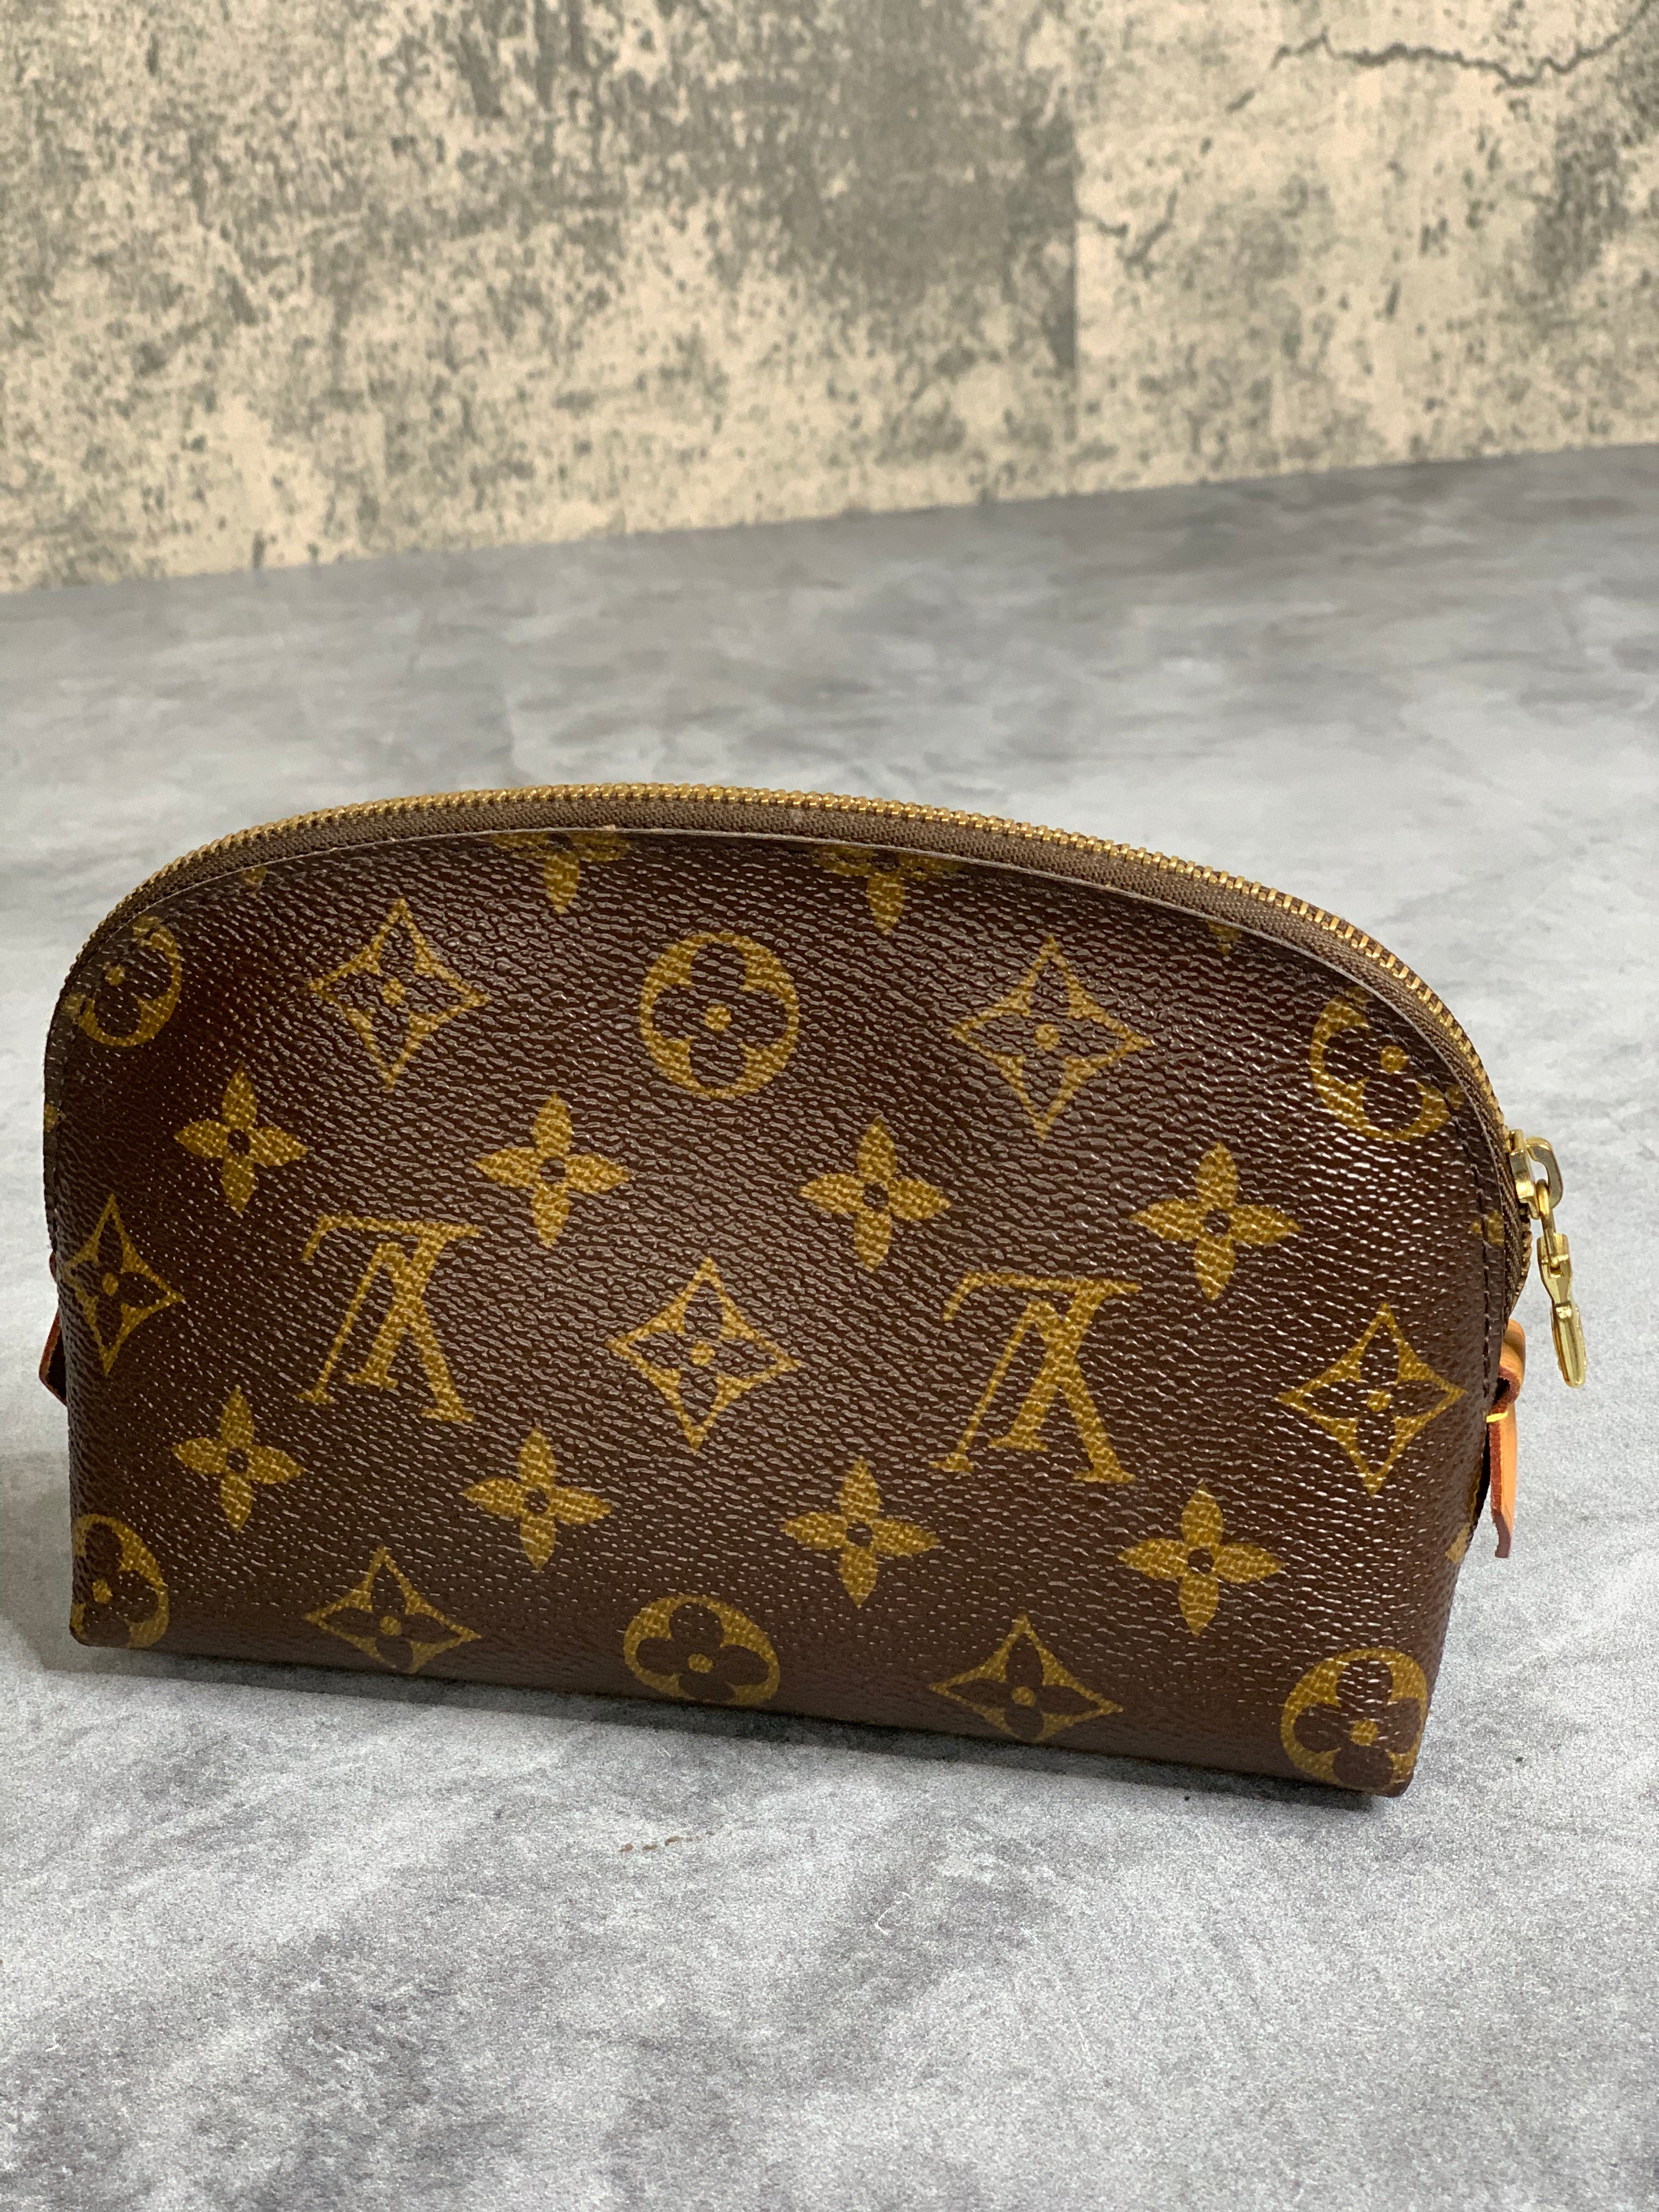 Louis Vuitton Cosmetic Bags & Cases for Women - Poshmark